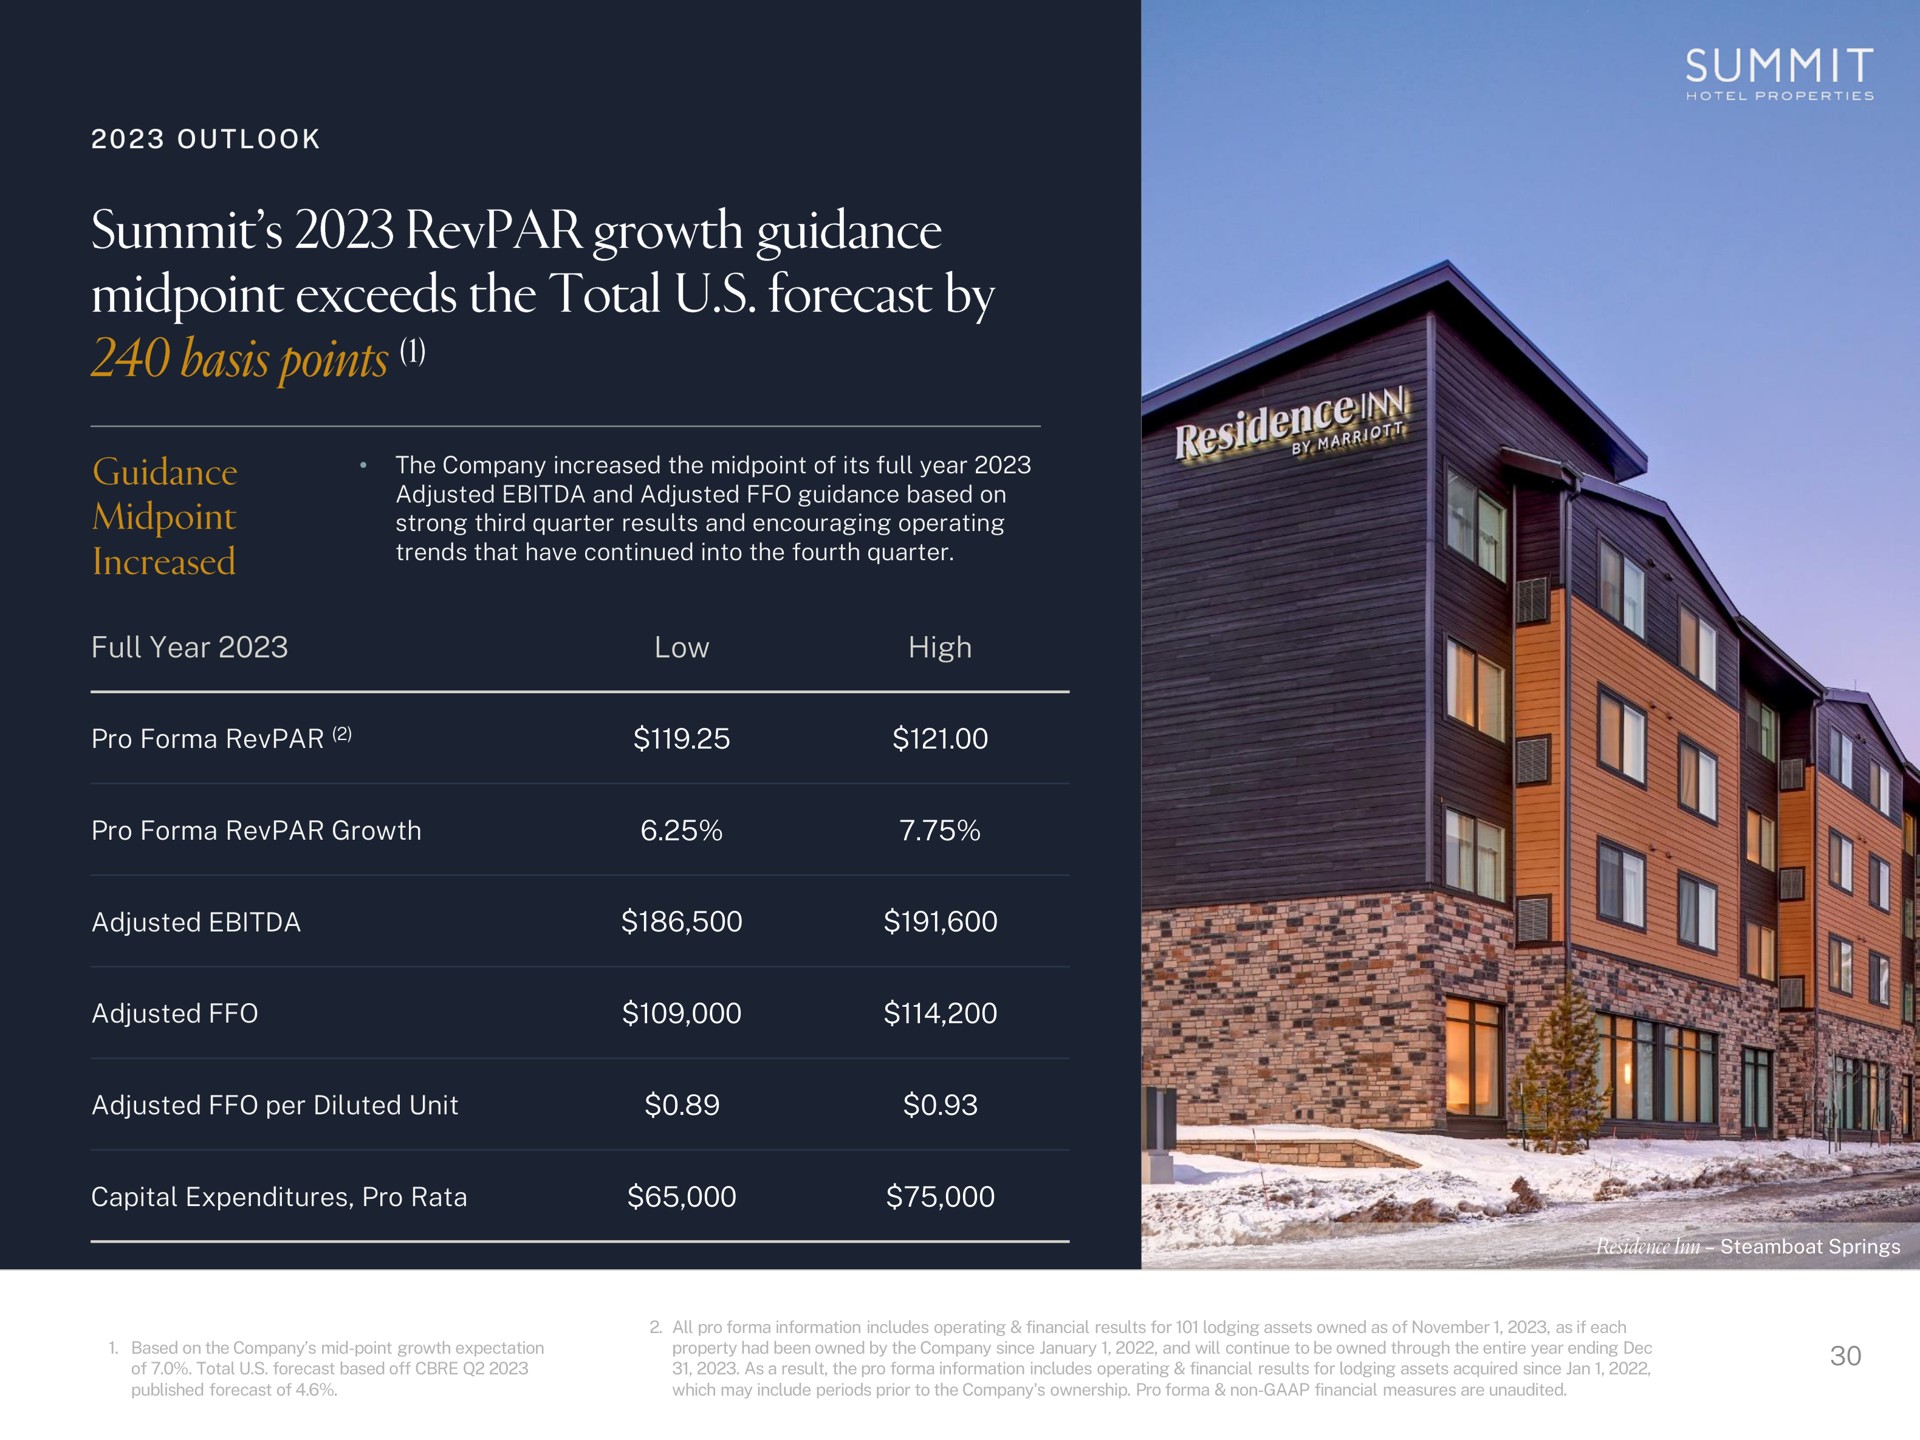 the company increased the of its full year adjusted and adjusted guidance based on strong third quarter results and encouraging operating trends that have continued into the fourth quarter full year low high pro pro growth adjusted adjusted adjusted per diluted unit capital expenditures pro rata summit exceeds total forecast by volt | Summit Hotel Properties